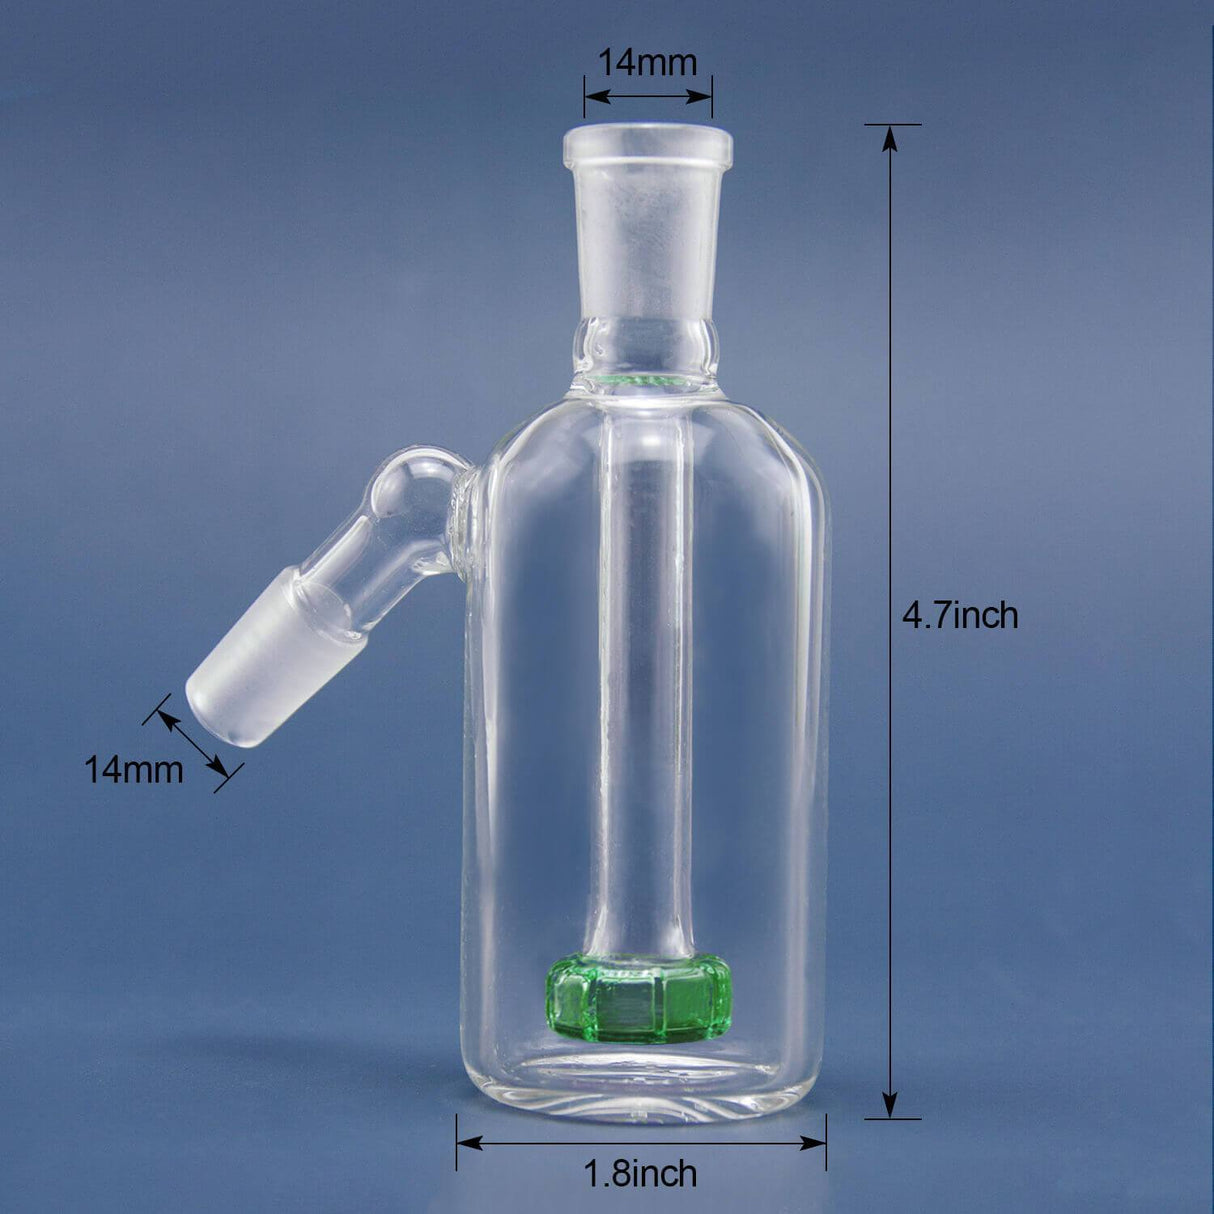 PILOT DIARY Ash Catcher with Green Percolator 14mm, Front View with Dimensions